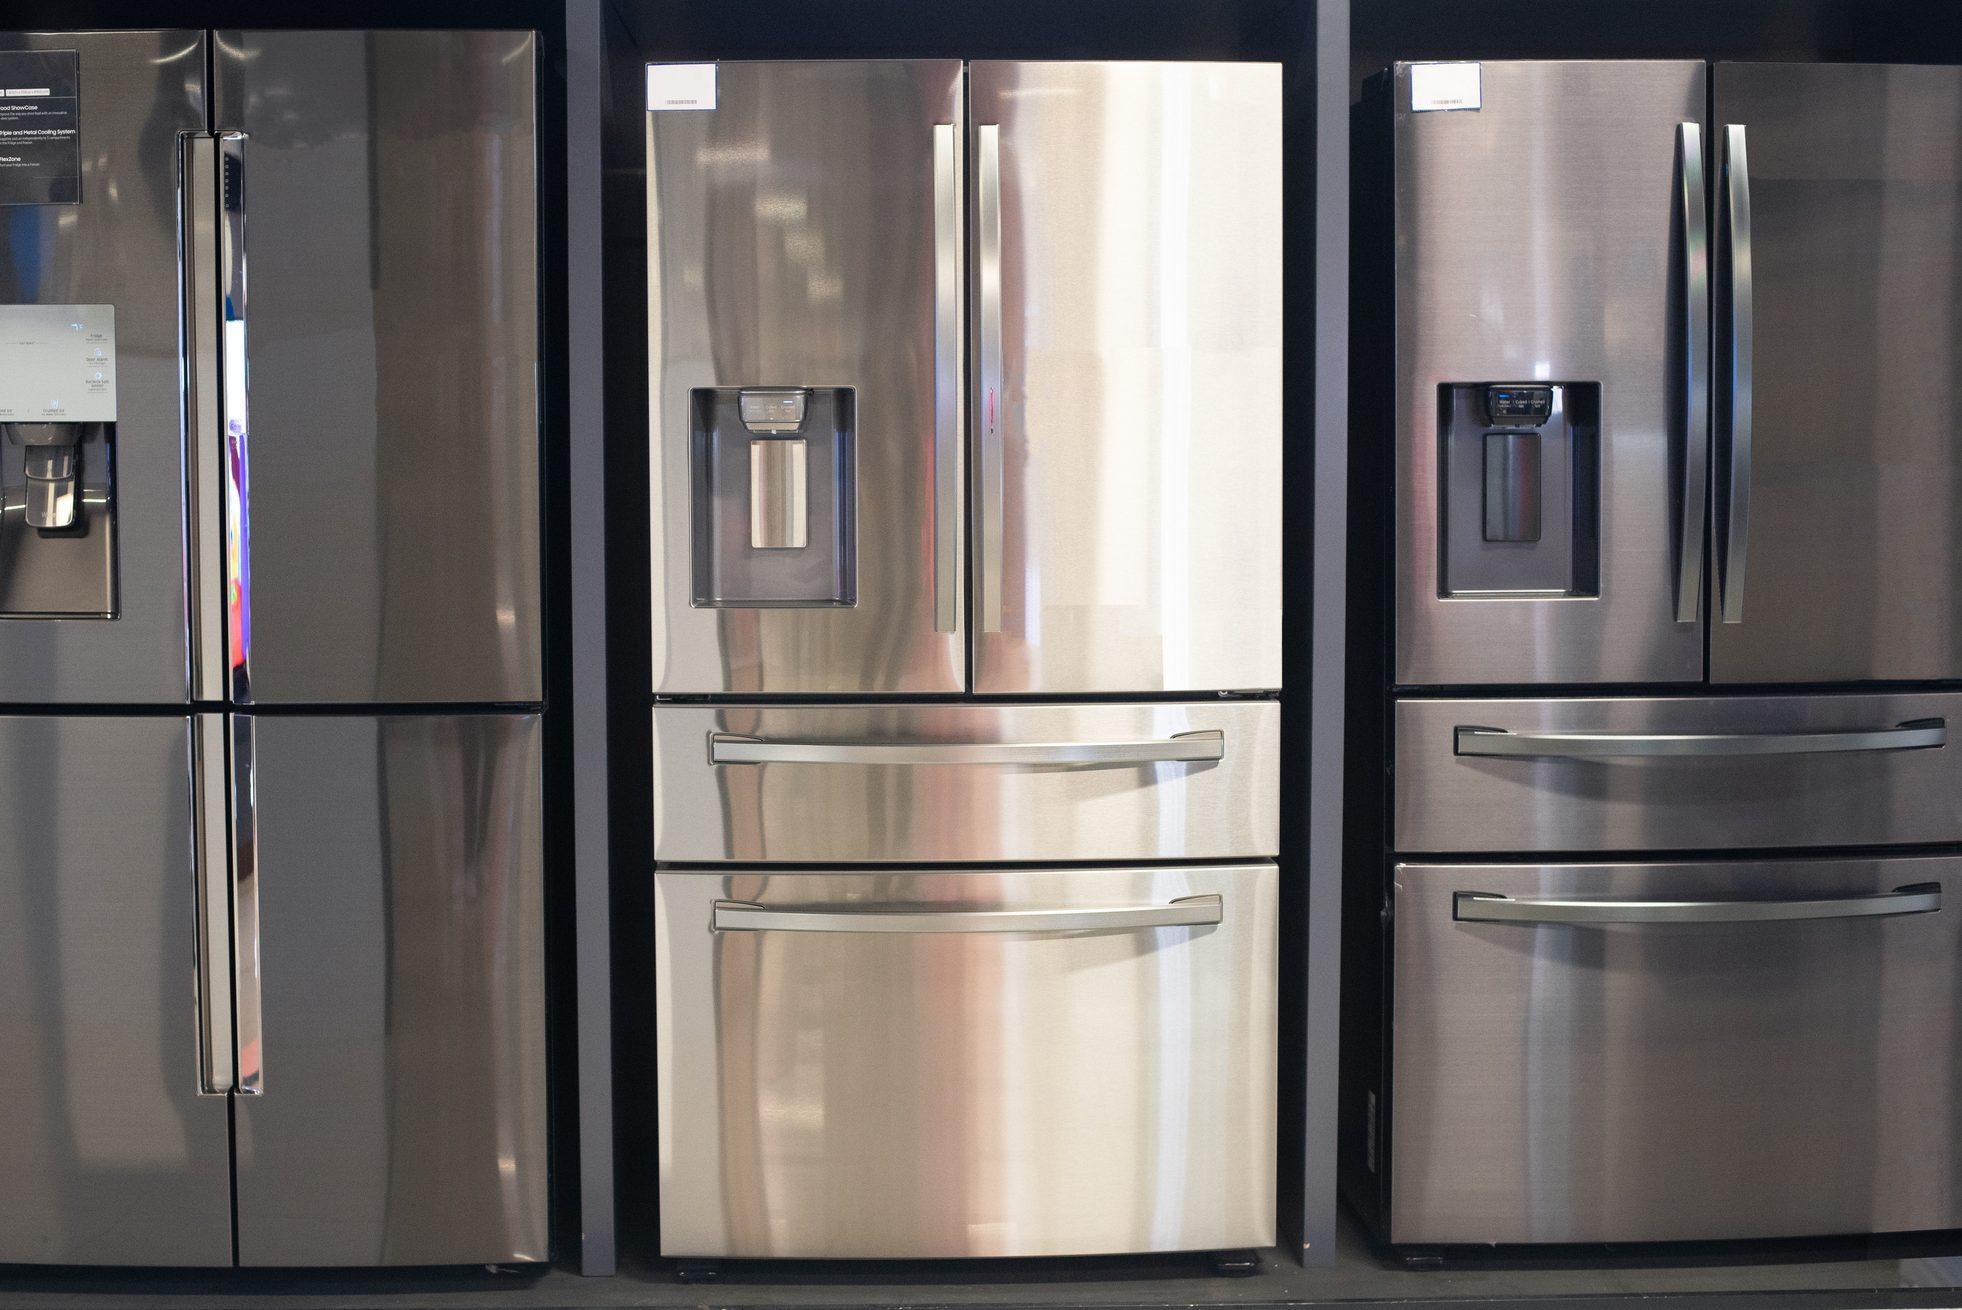 New Home Appliances: What's Hot In The Kitchen